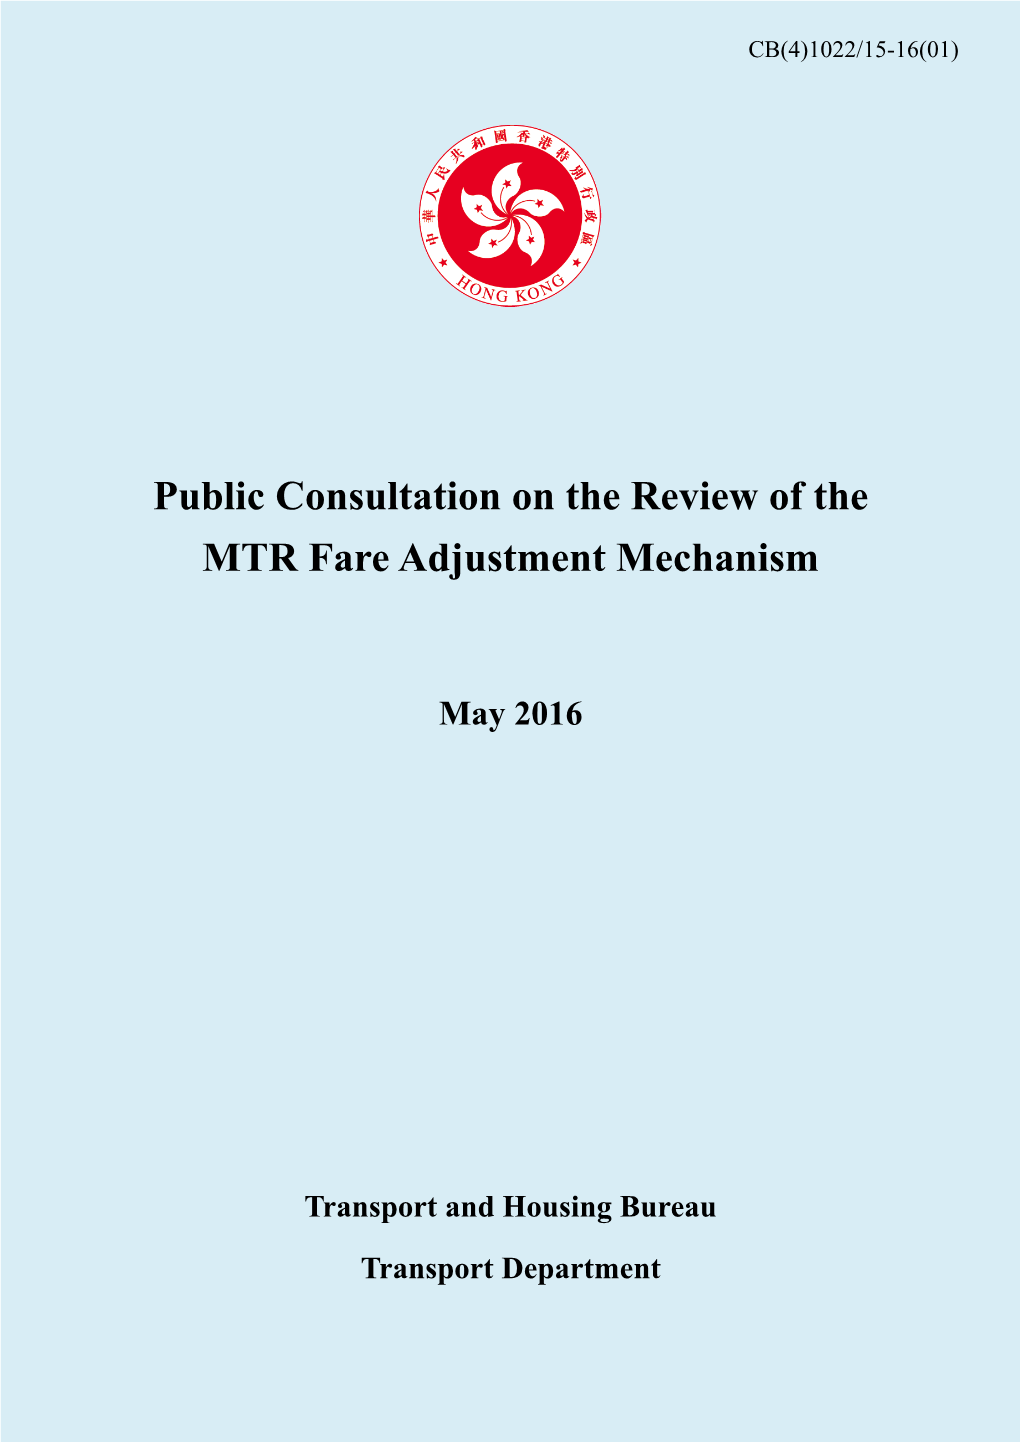 Public Consultation on the Review of the MTR Fare Adjustment Mechanism